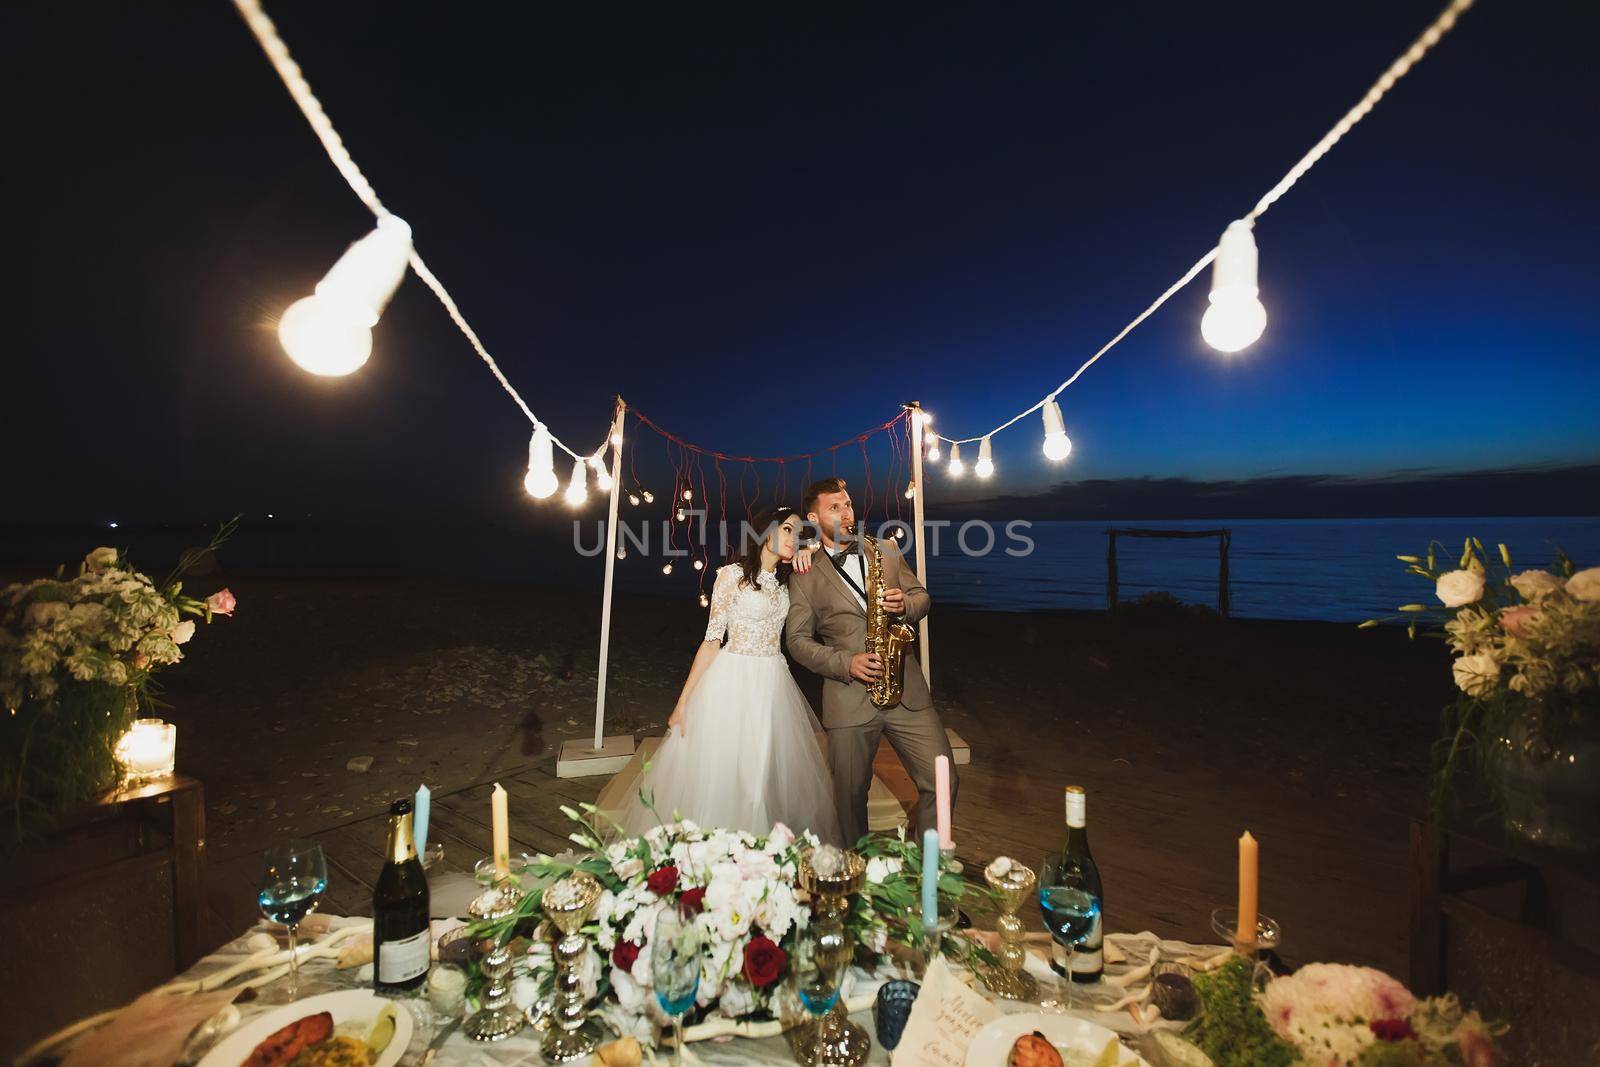 Wedding banquet on the ocean shore at night. The groom is playing the saxophone by StudioPeace